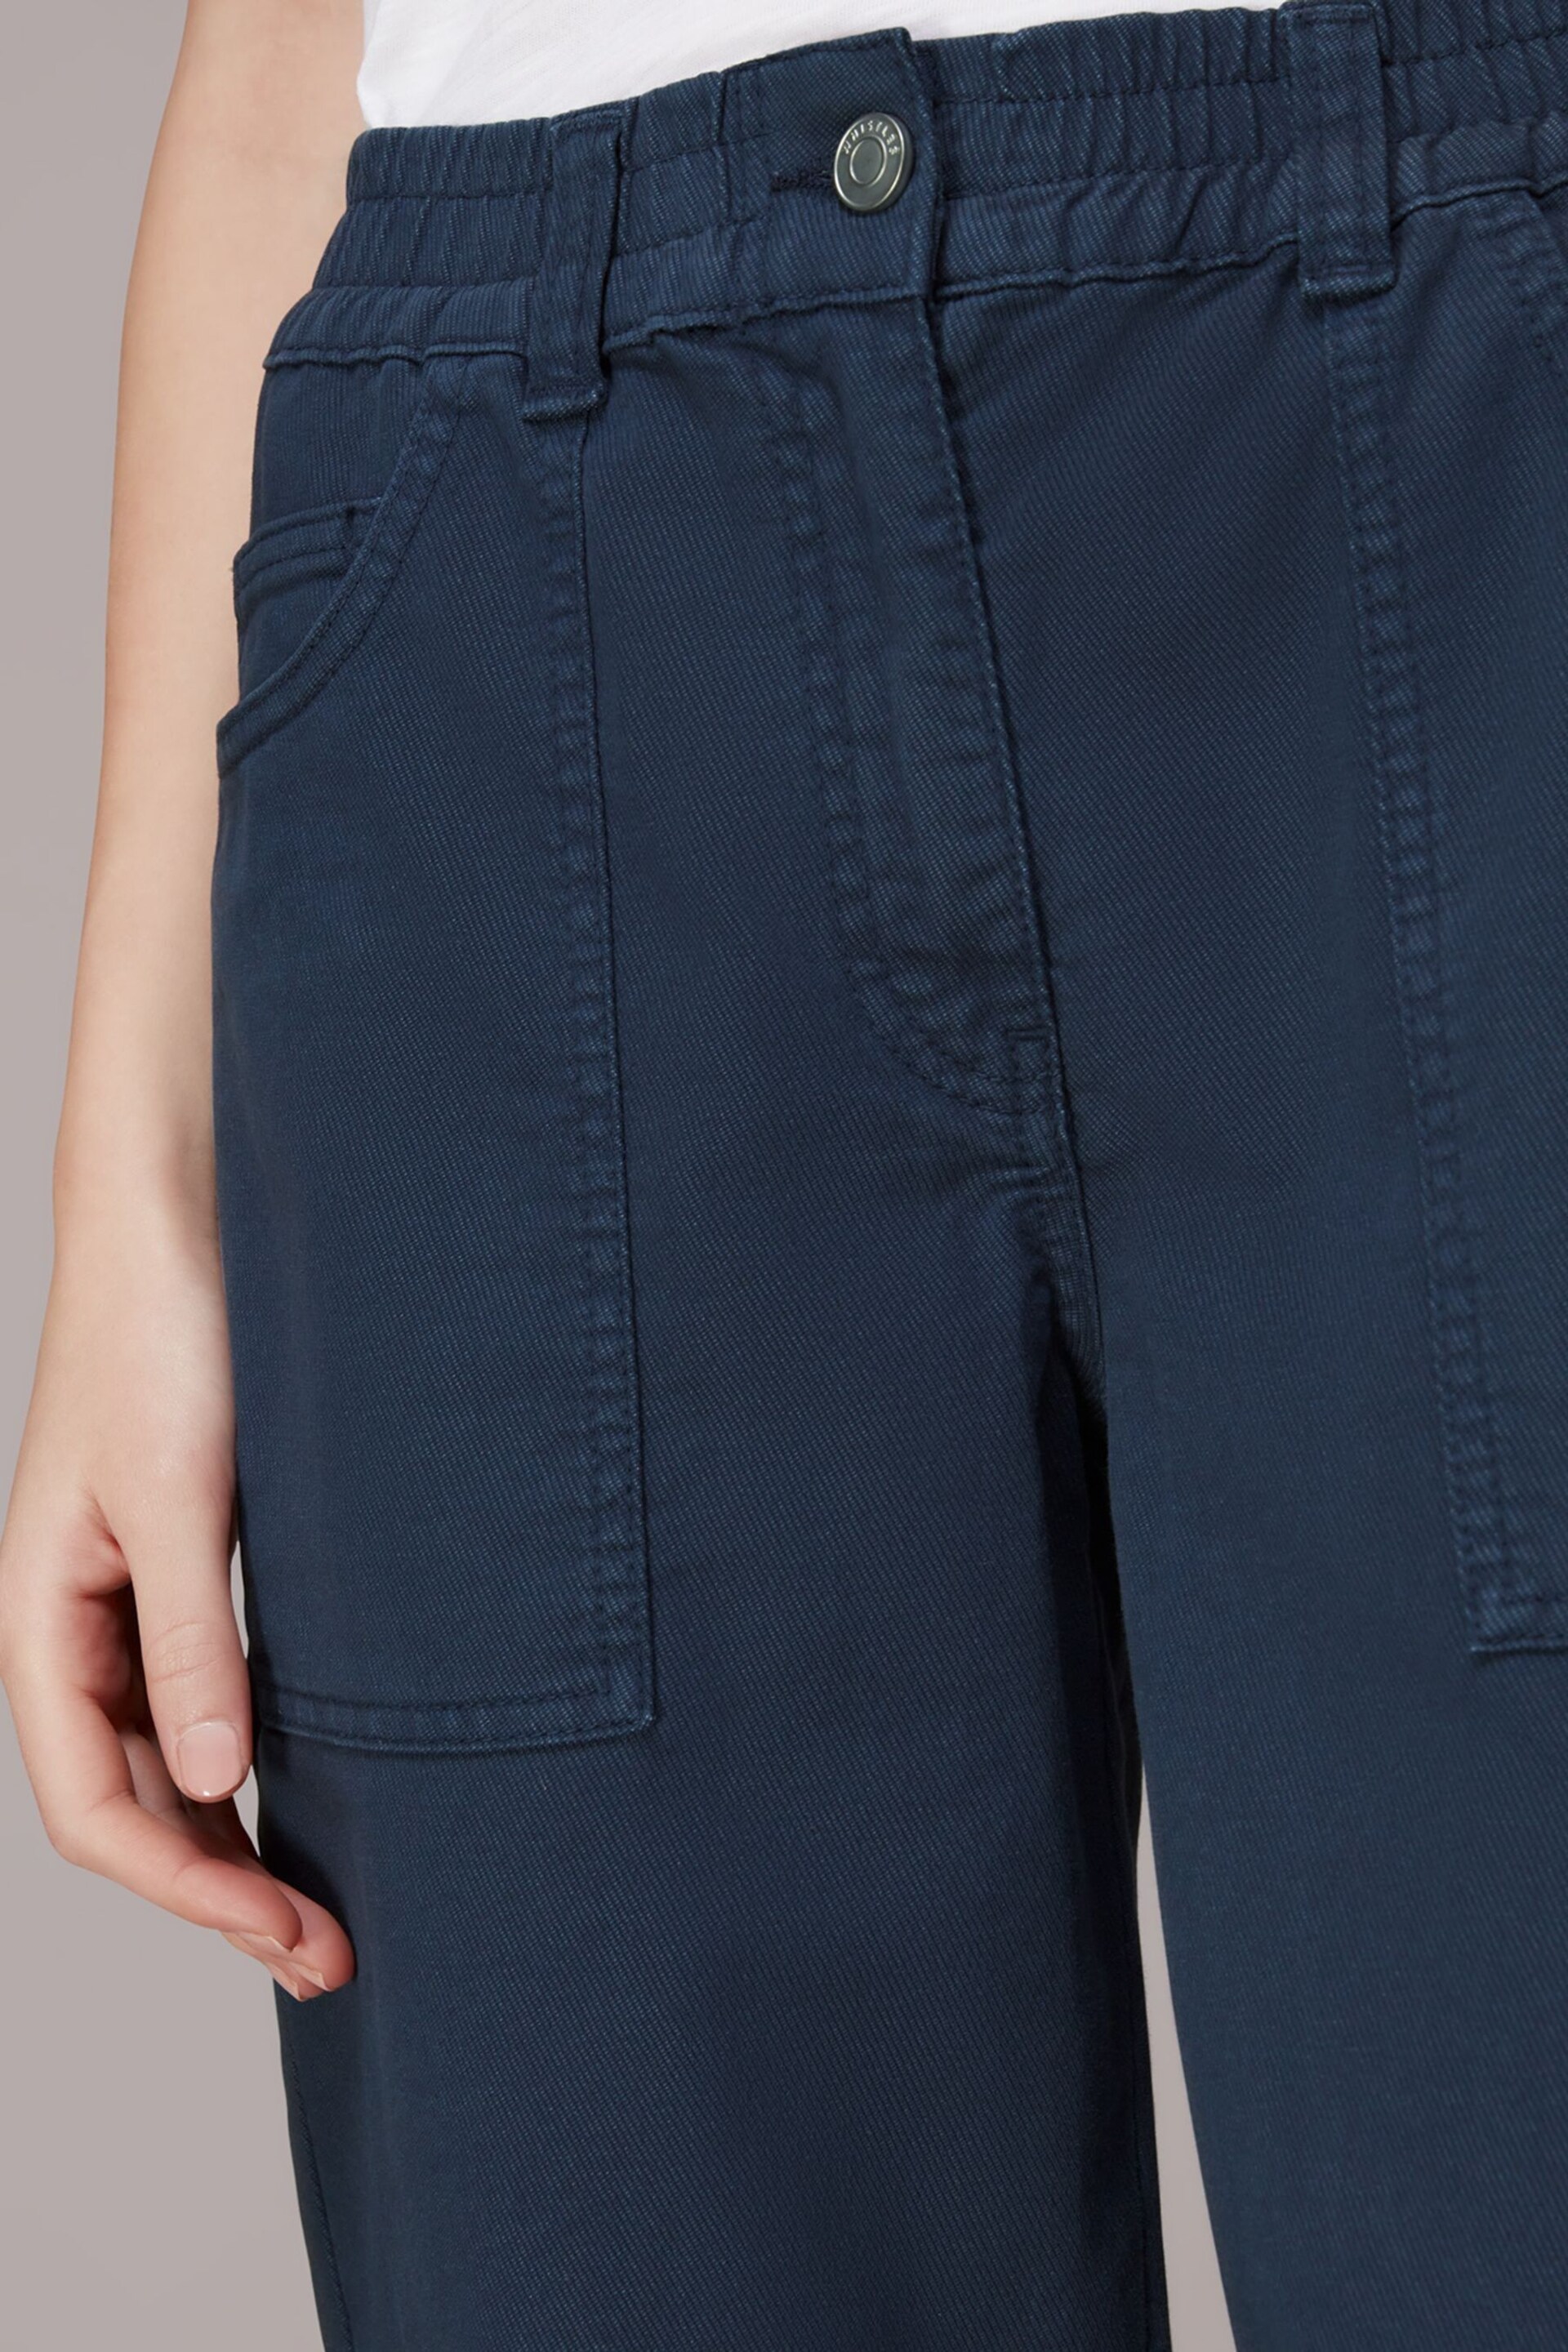 Whistles Blue Tessa Casual Trousers - Image 4 of 5